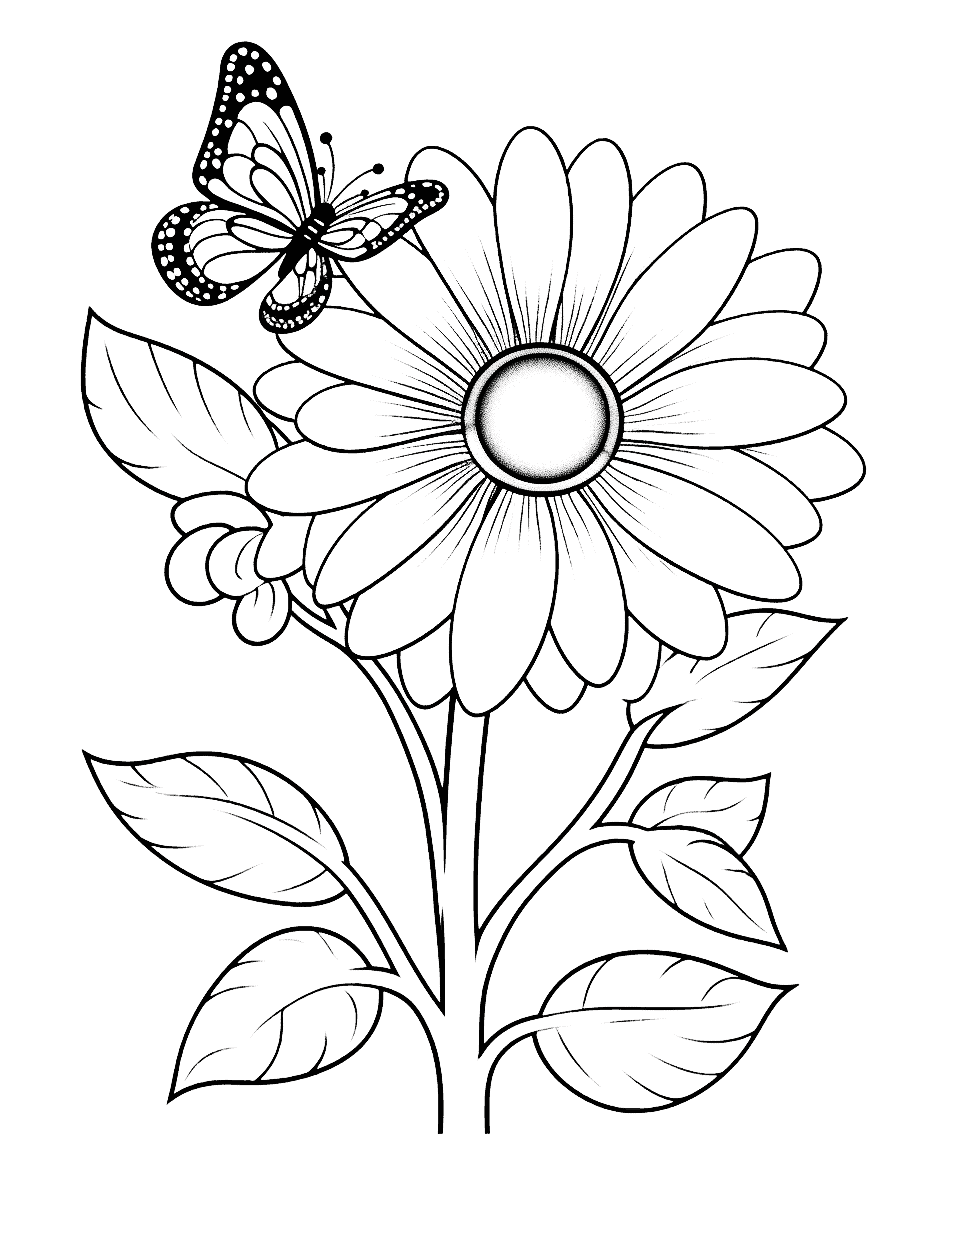 Summer Sunflower and Butterfly Flower Coloring Page - A vibrant summer scene with a sunflower and butterfly.